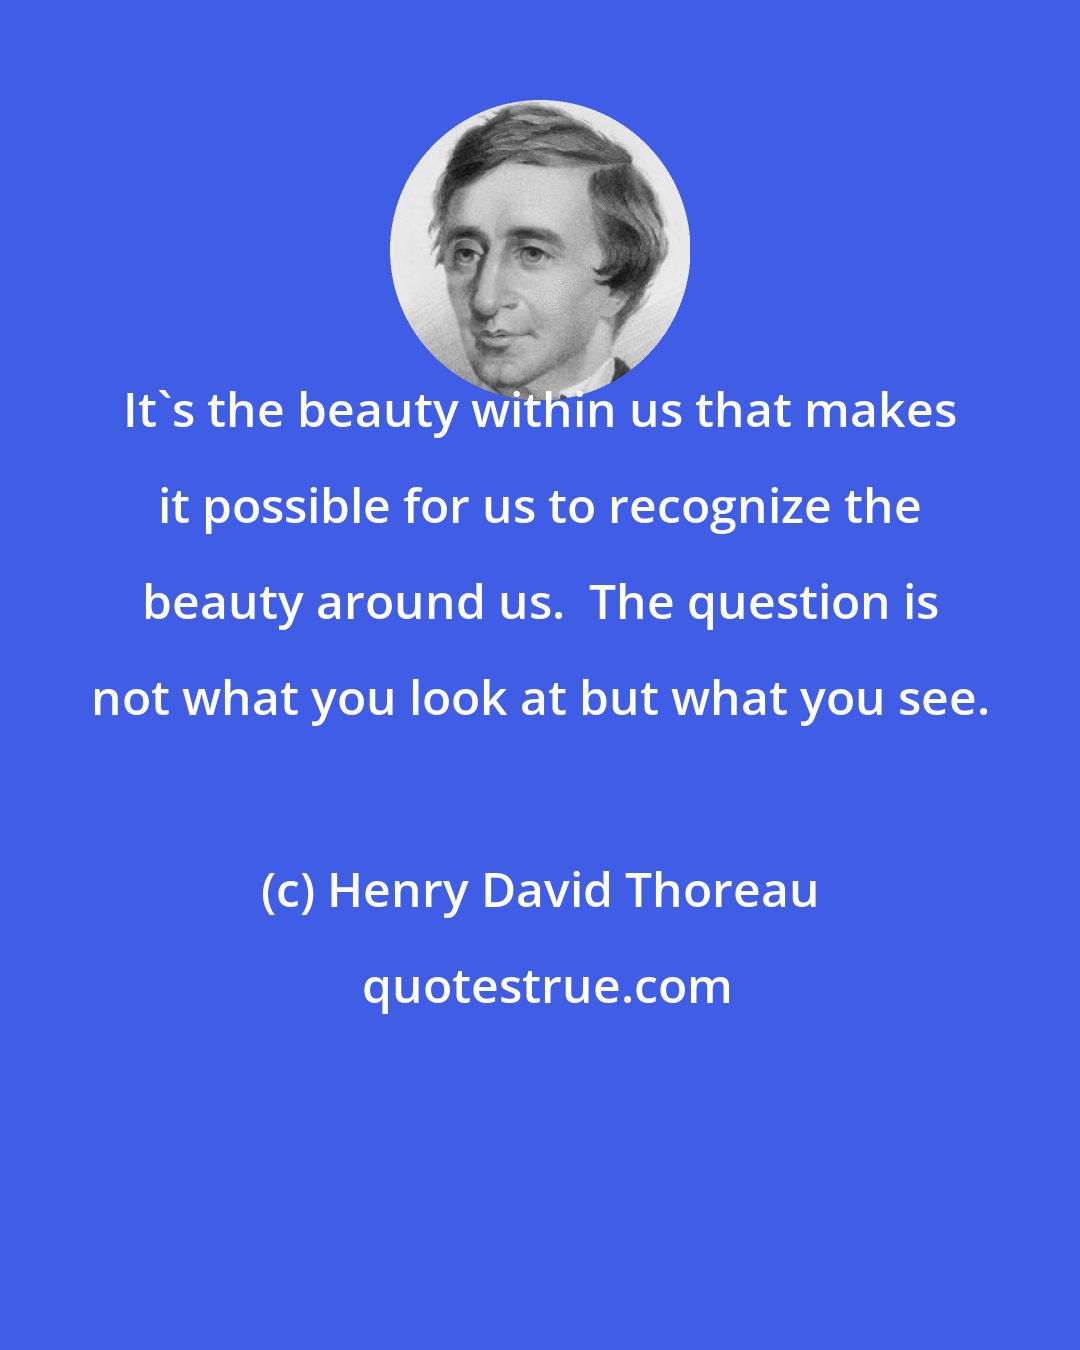 Henry David Thoreau: It's the beauty within us that makes it possible for us to recognize the beauty around us.  The question is not what you look at but what you see.